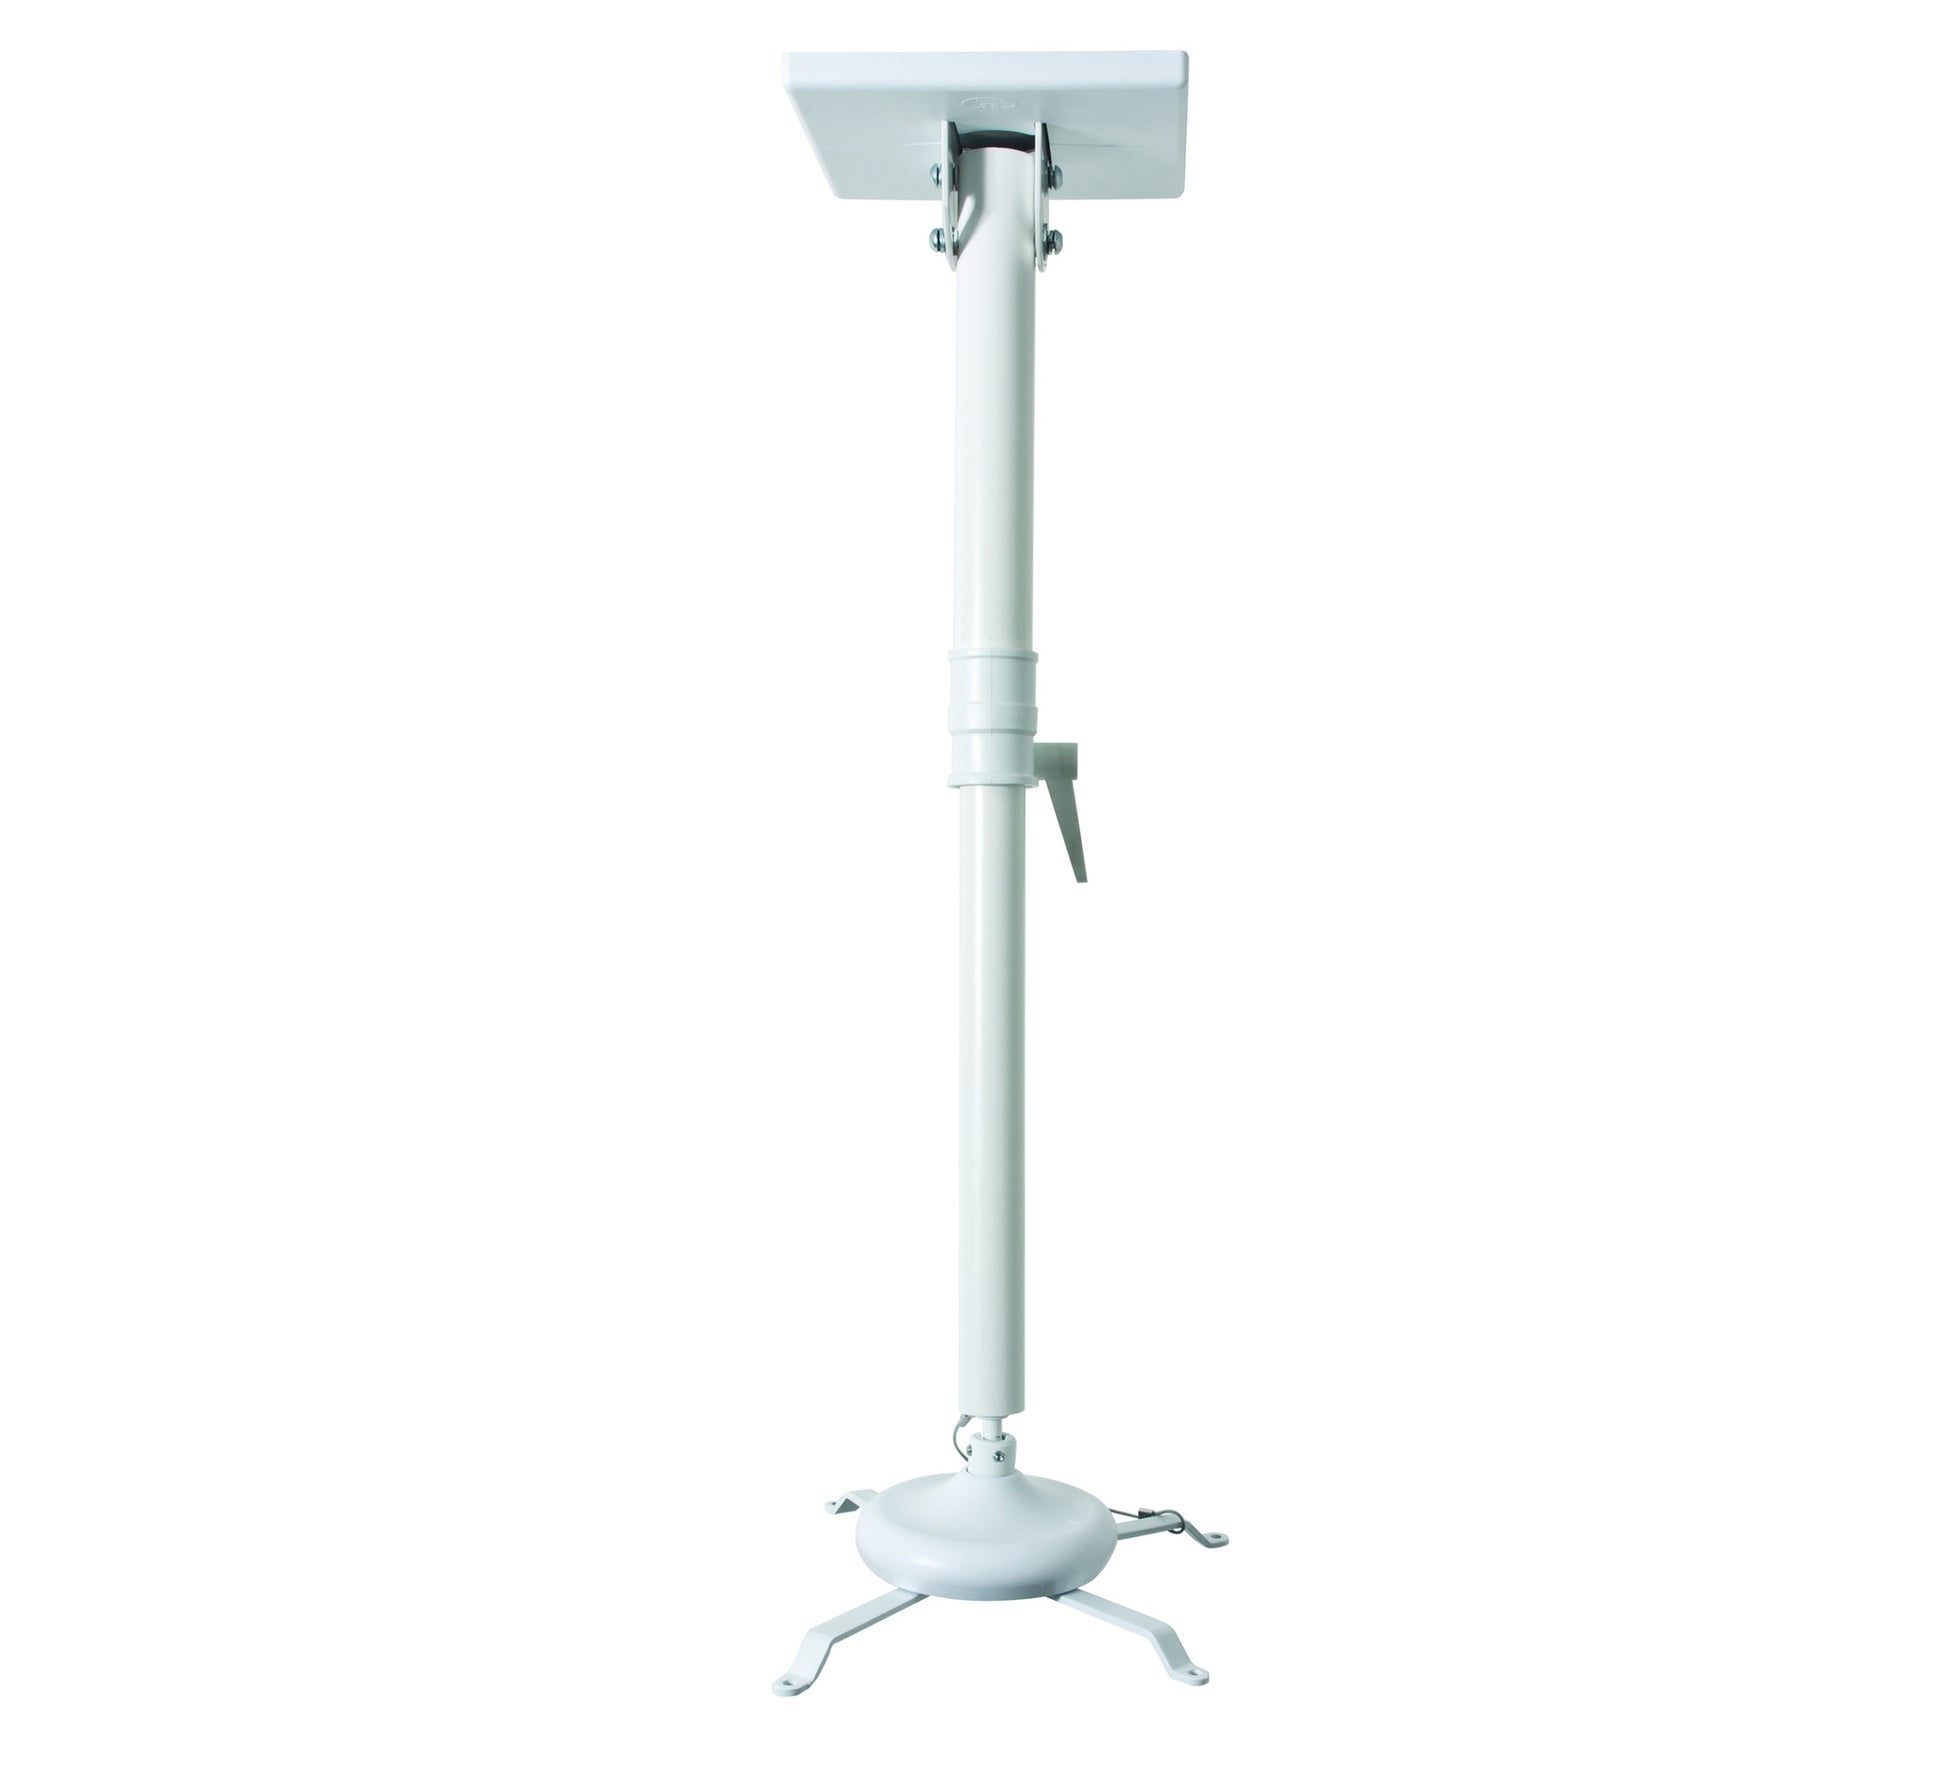 Universal projector ceiling mount shown with max 830mm drop